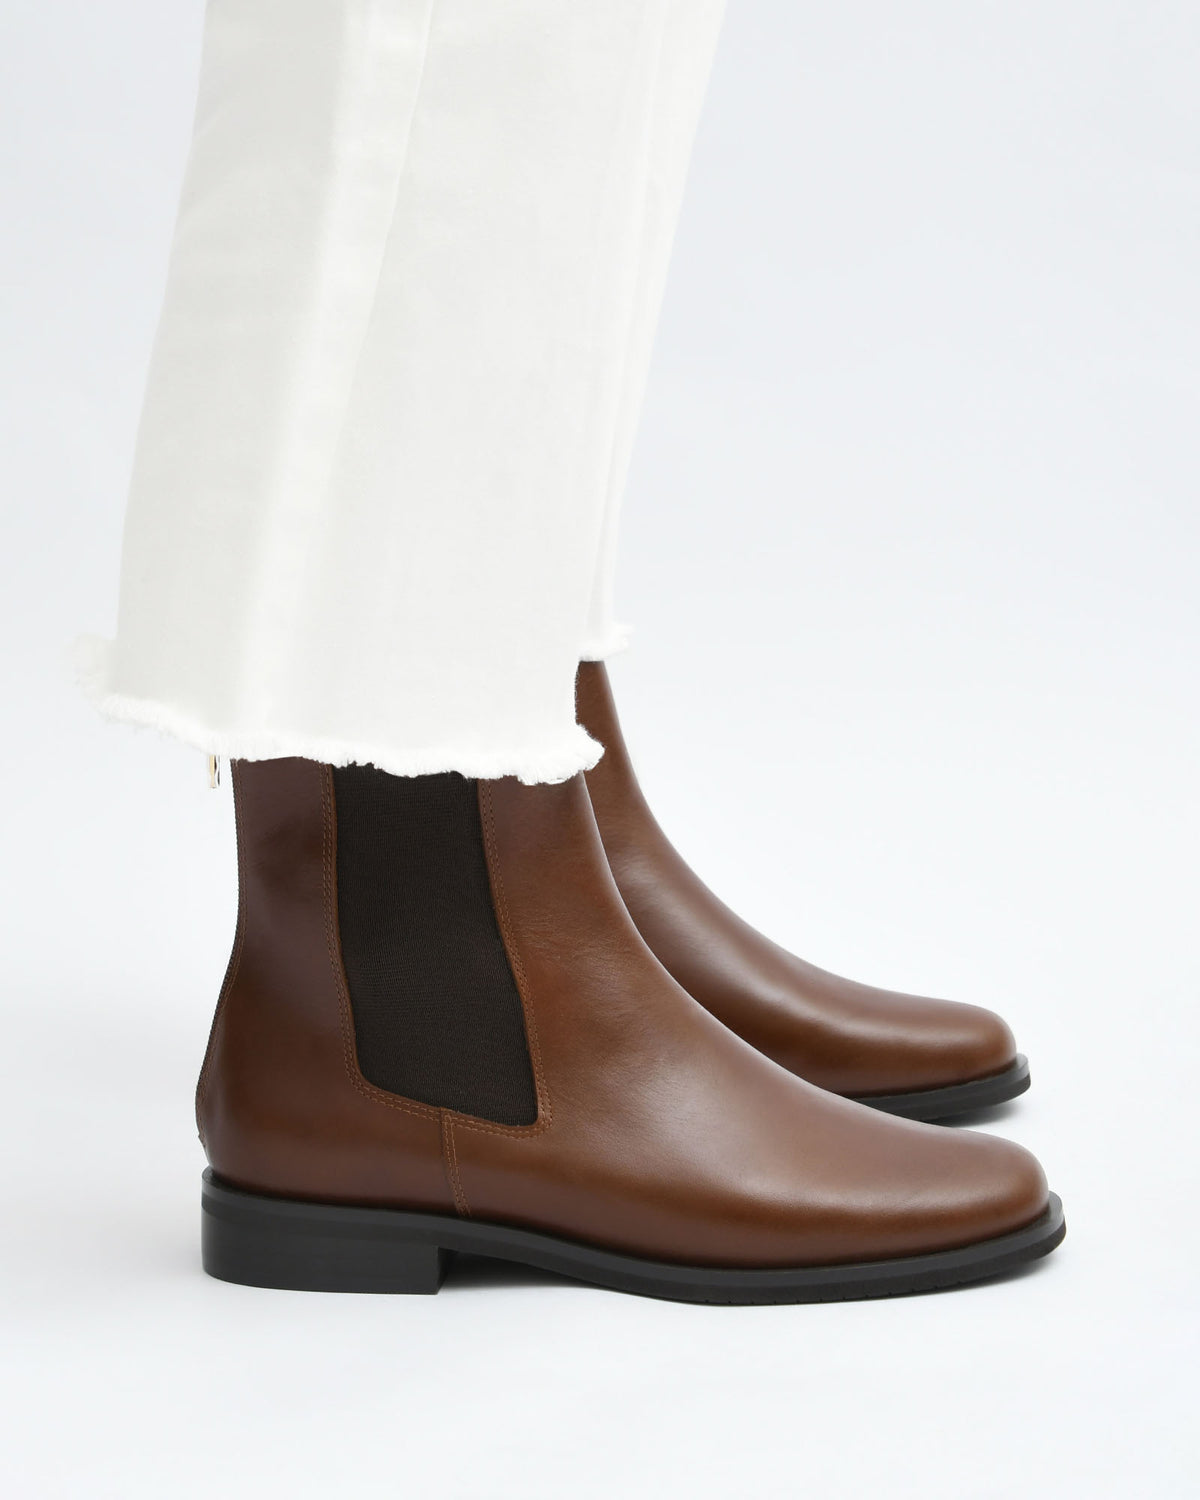 GABE FLAT ANKLE BOOT DARK CHOCOLATE LEATHER